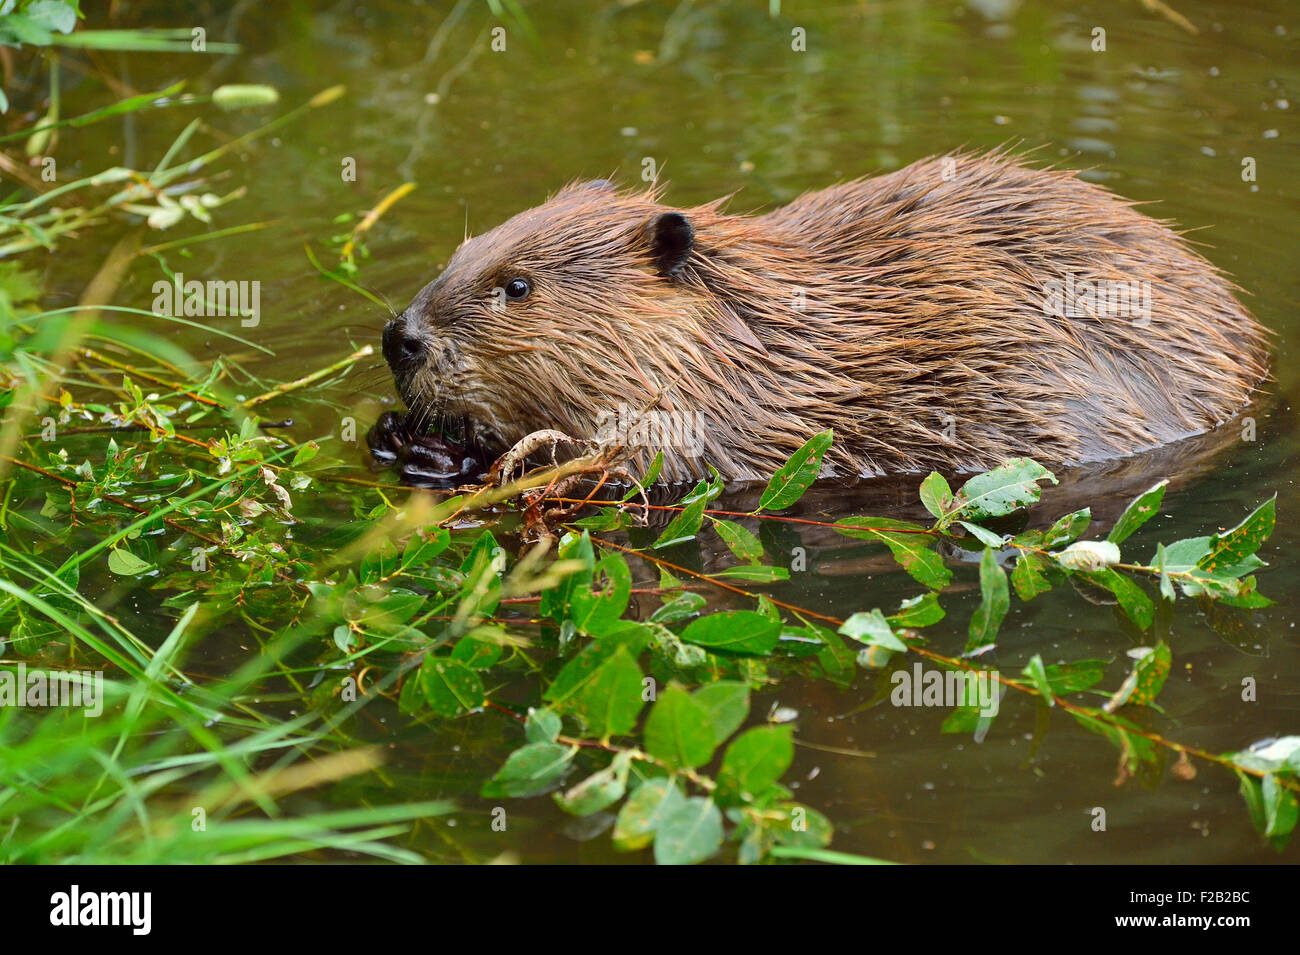 A wild beaver  'Castor canadenis', floating in the water while feeding on some green leaves. Stock Photo